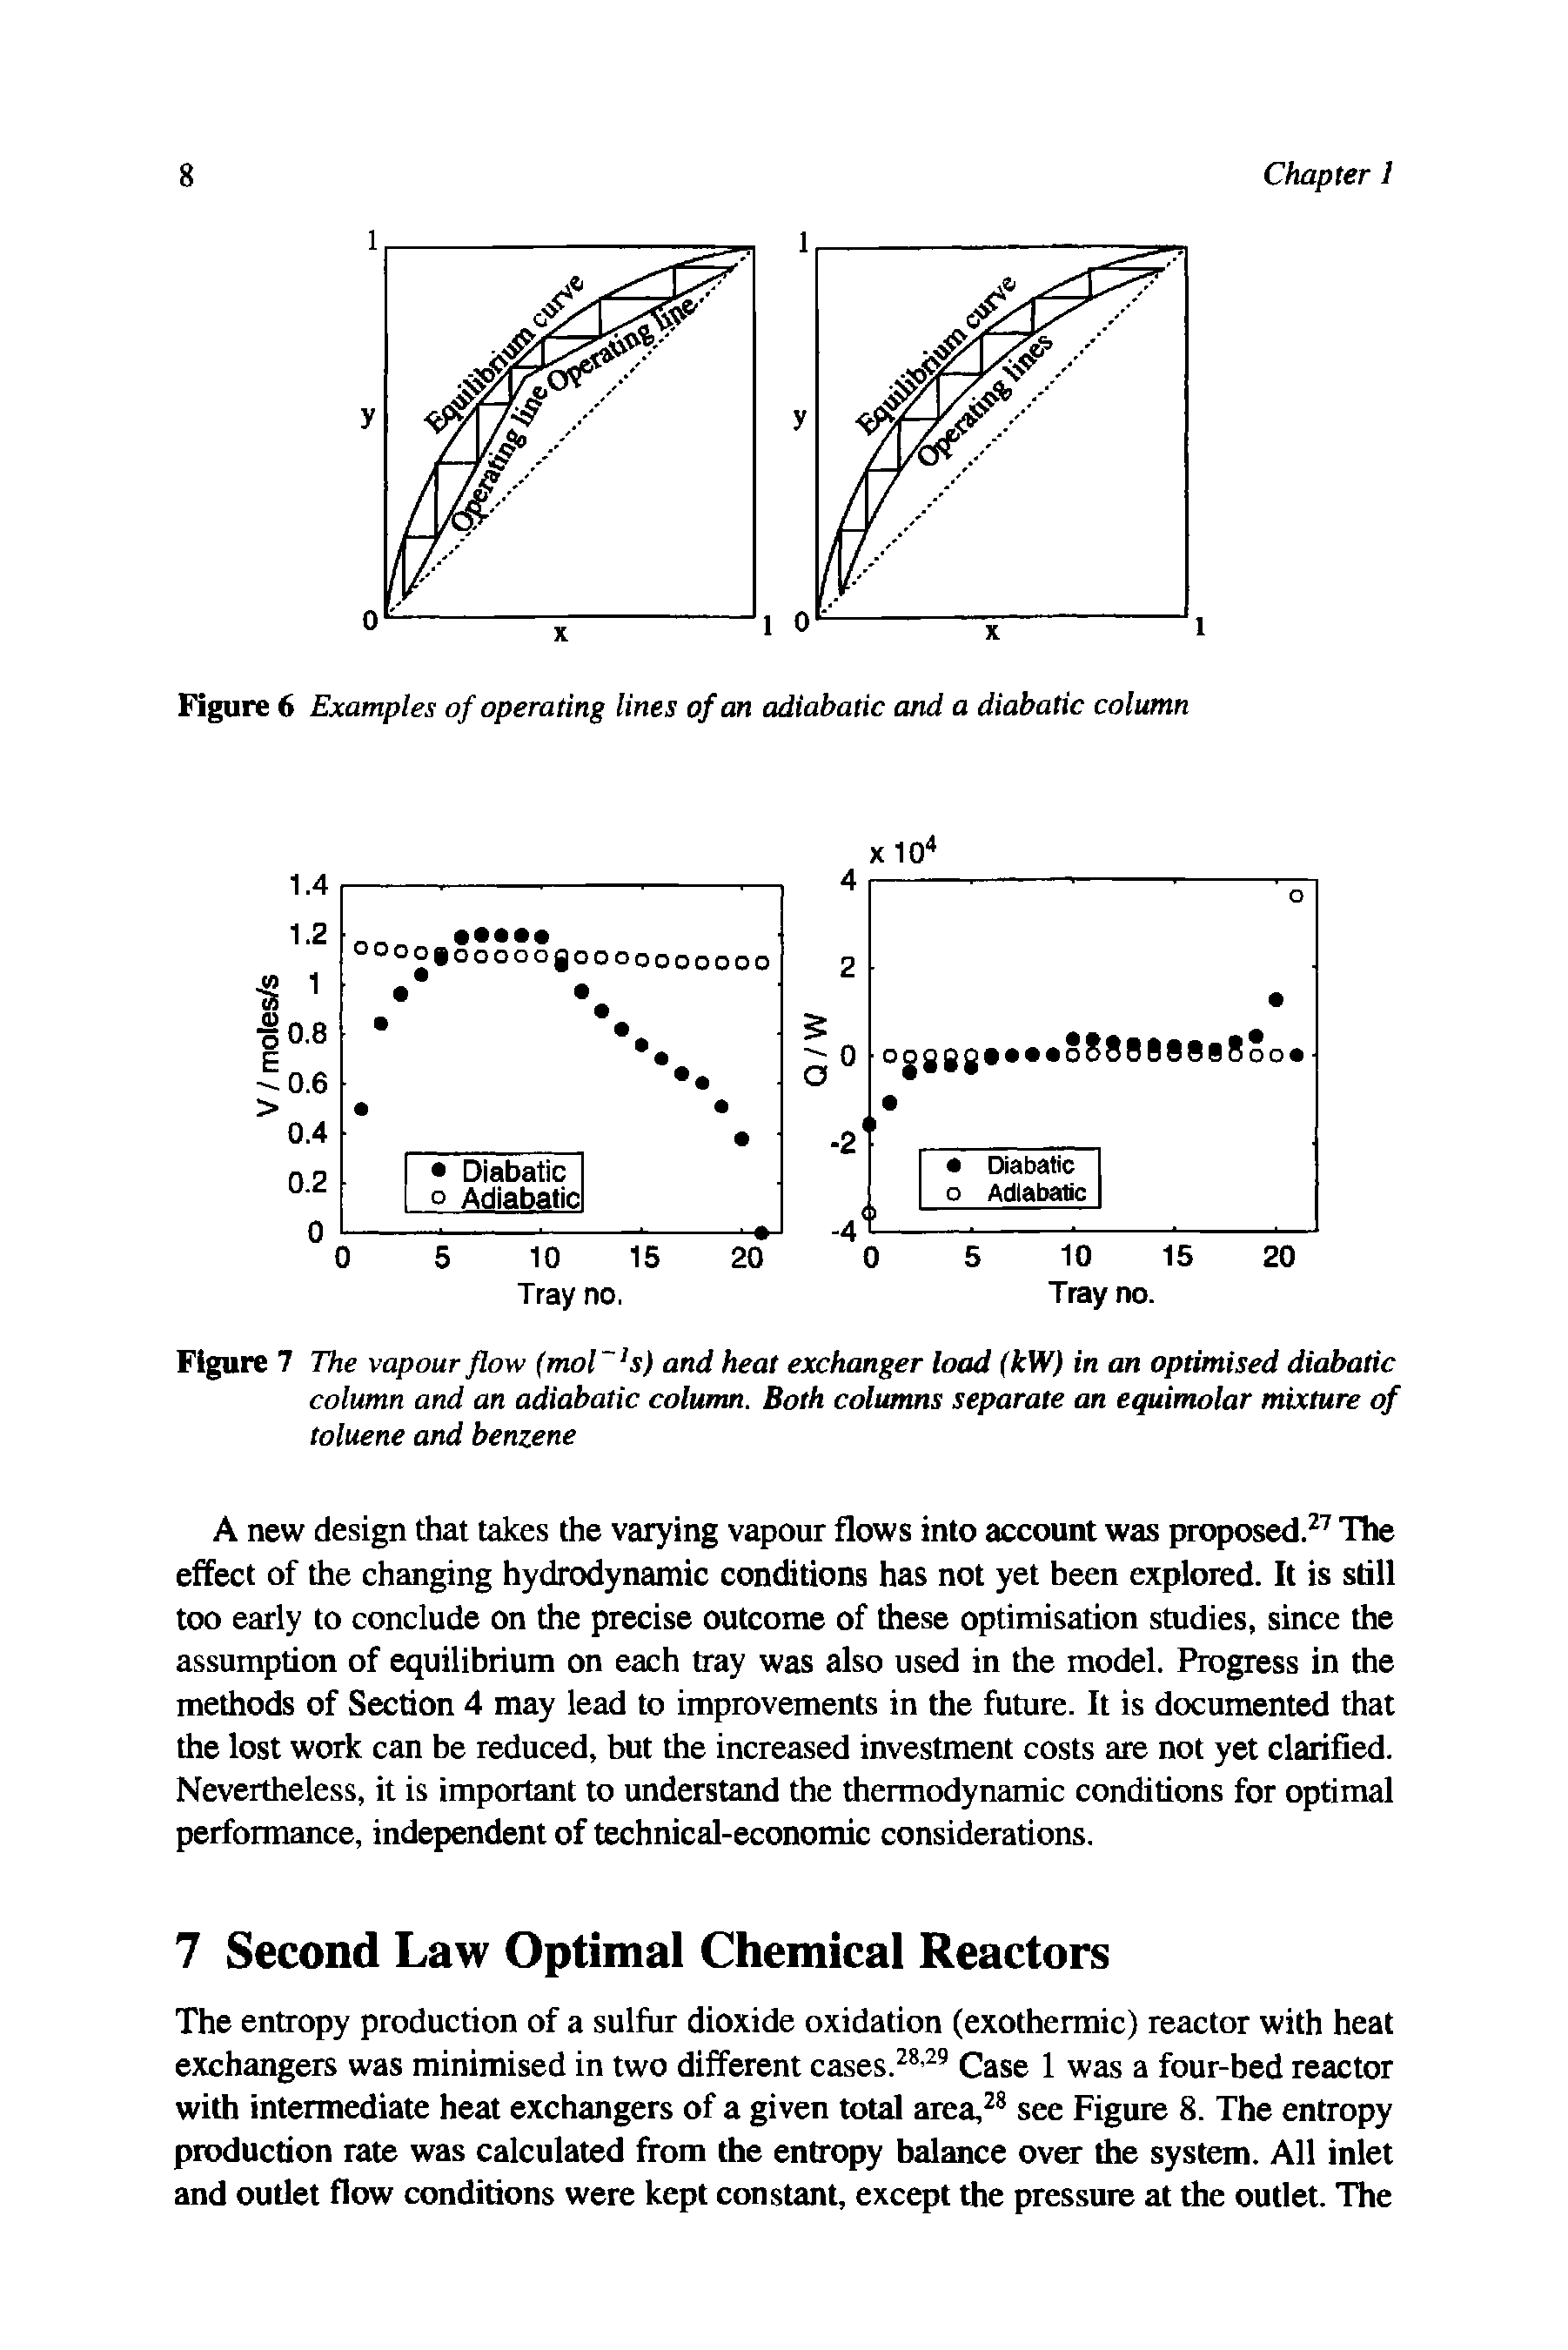 Figure 7 The vapour flow (mol s) and heat exchanger load (kW) in an optimised diabatic column and an adiabatic column. Both columns separate an equirrwlar mixture of toluene and benzene...